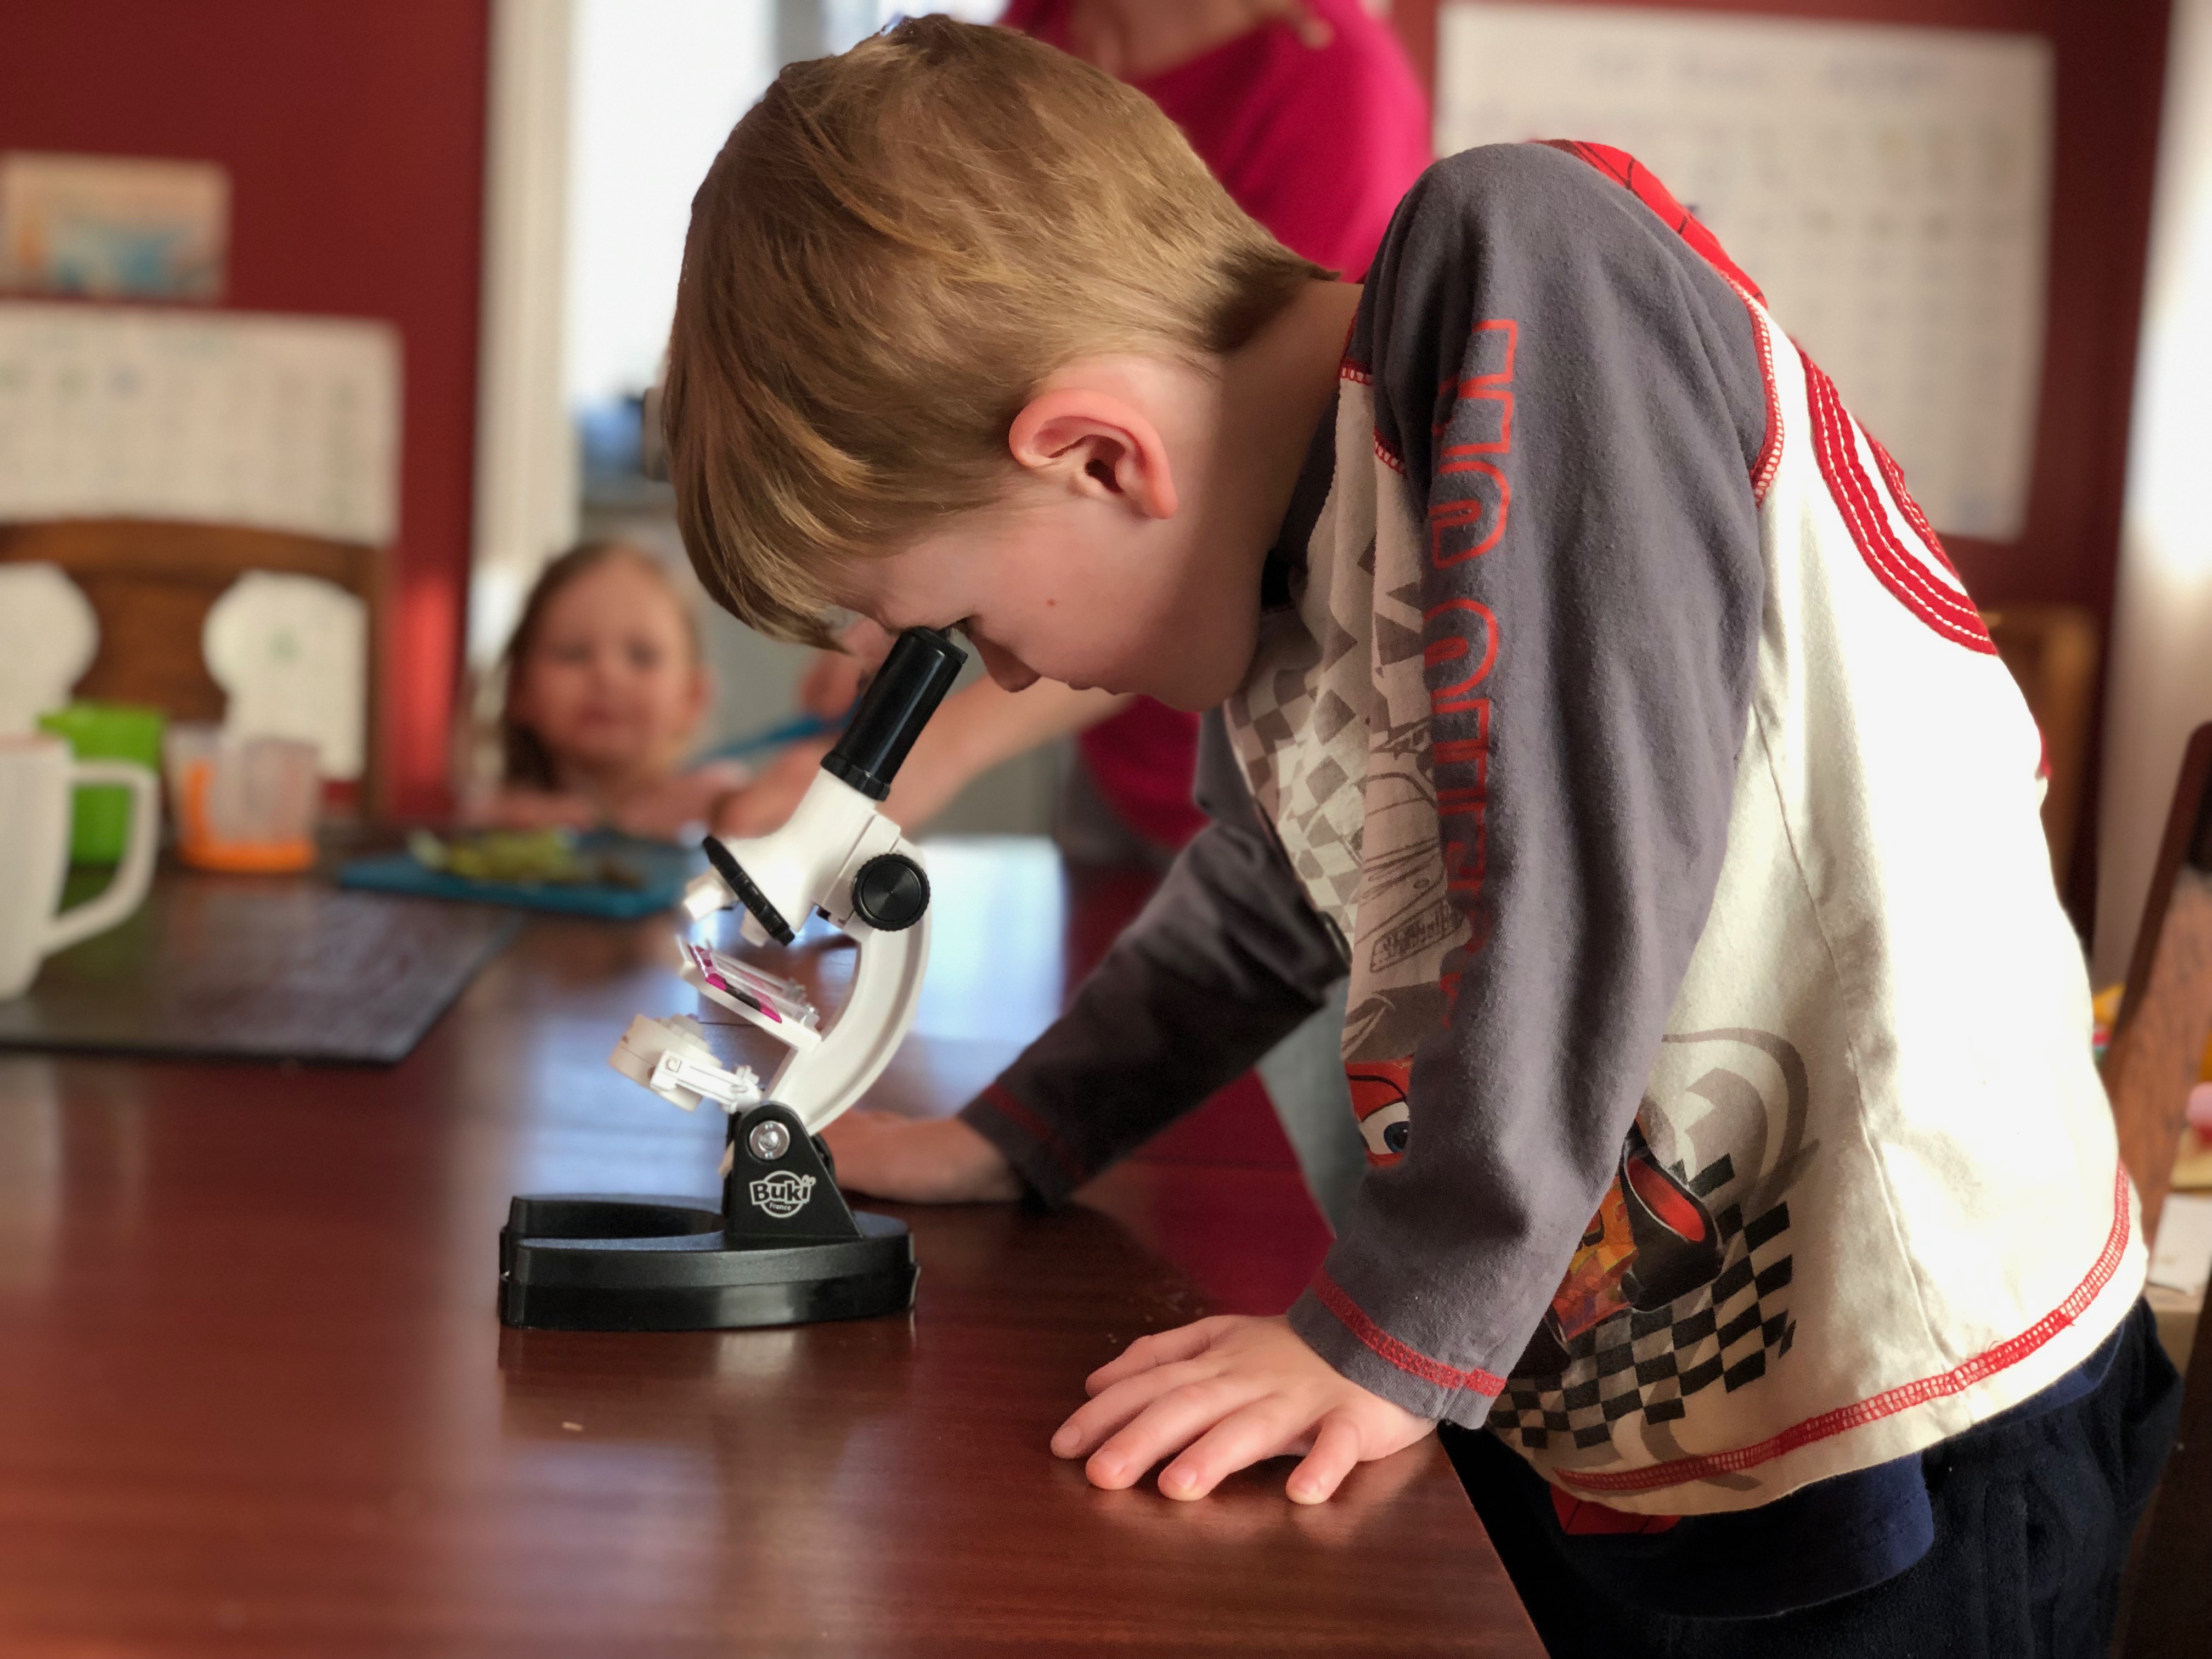 A young boy looks through a microscope